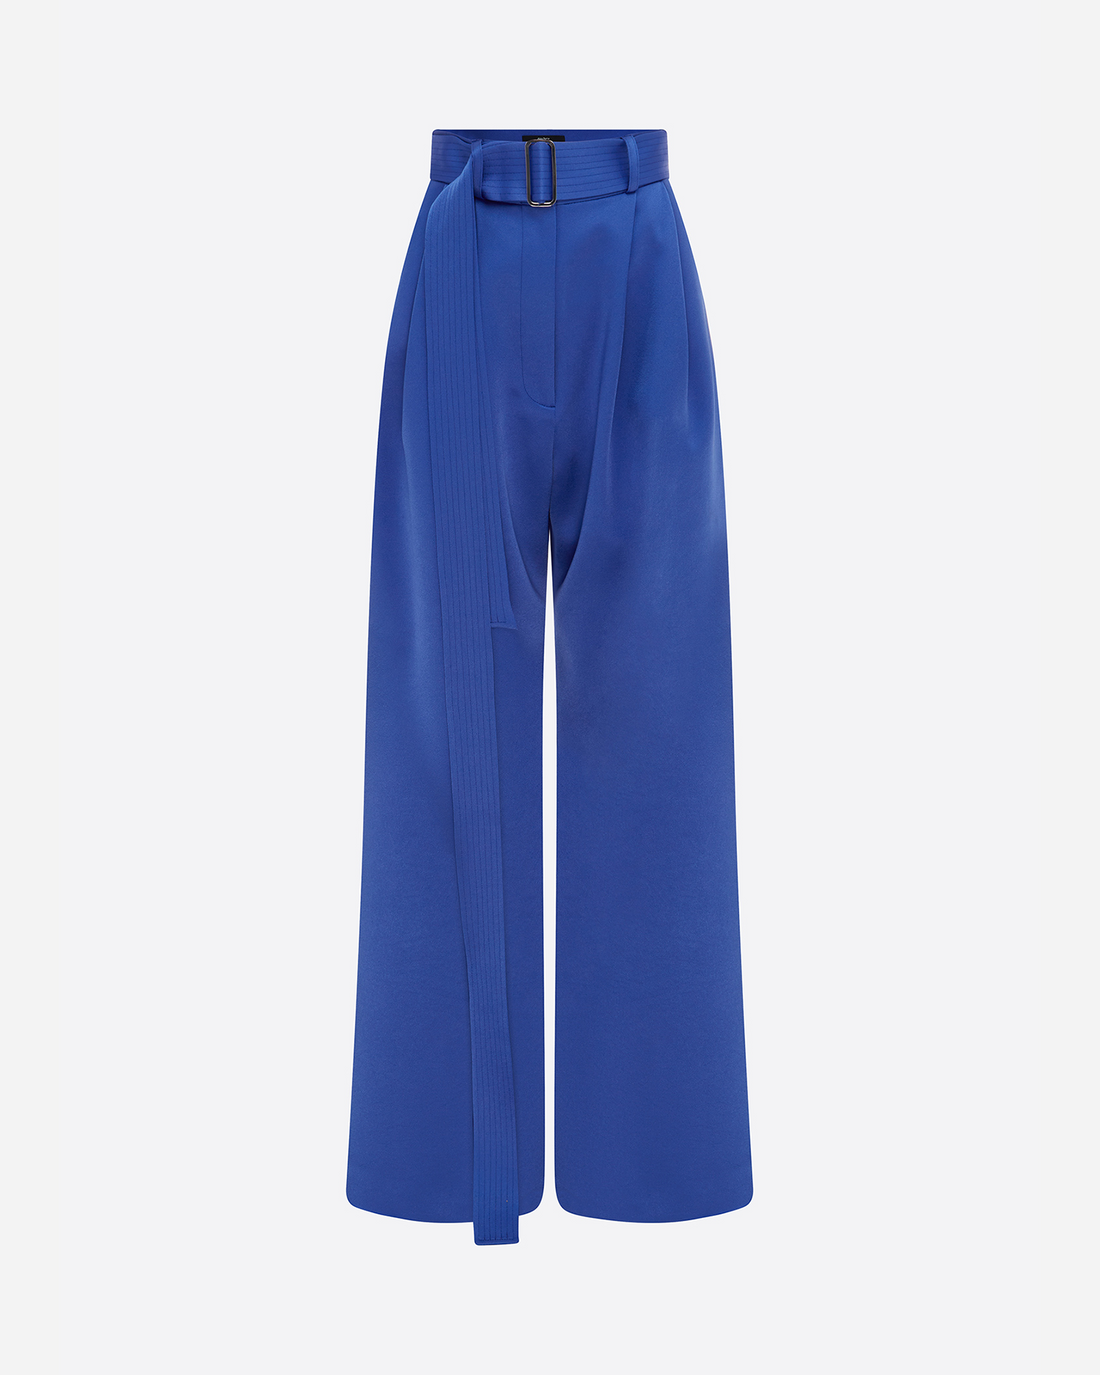 Pleat Trouser with Belt in Satin Crepe